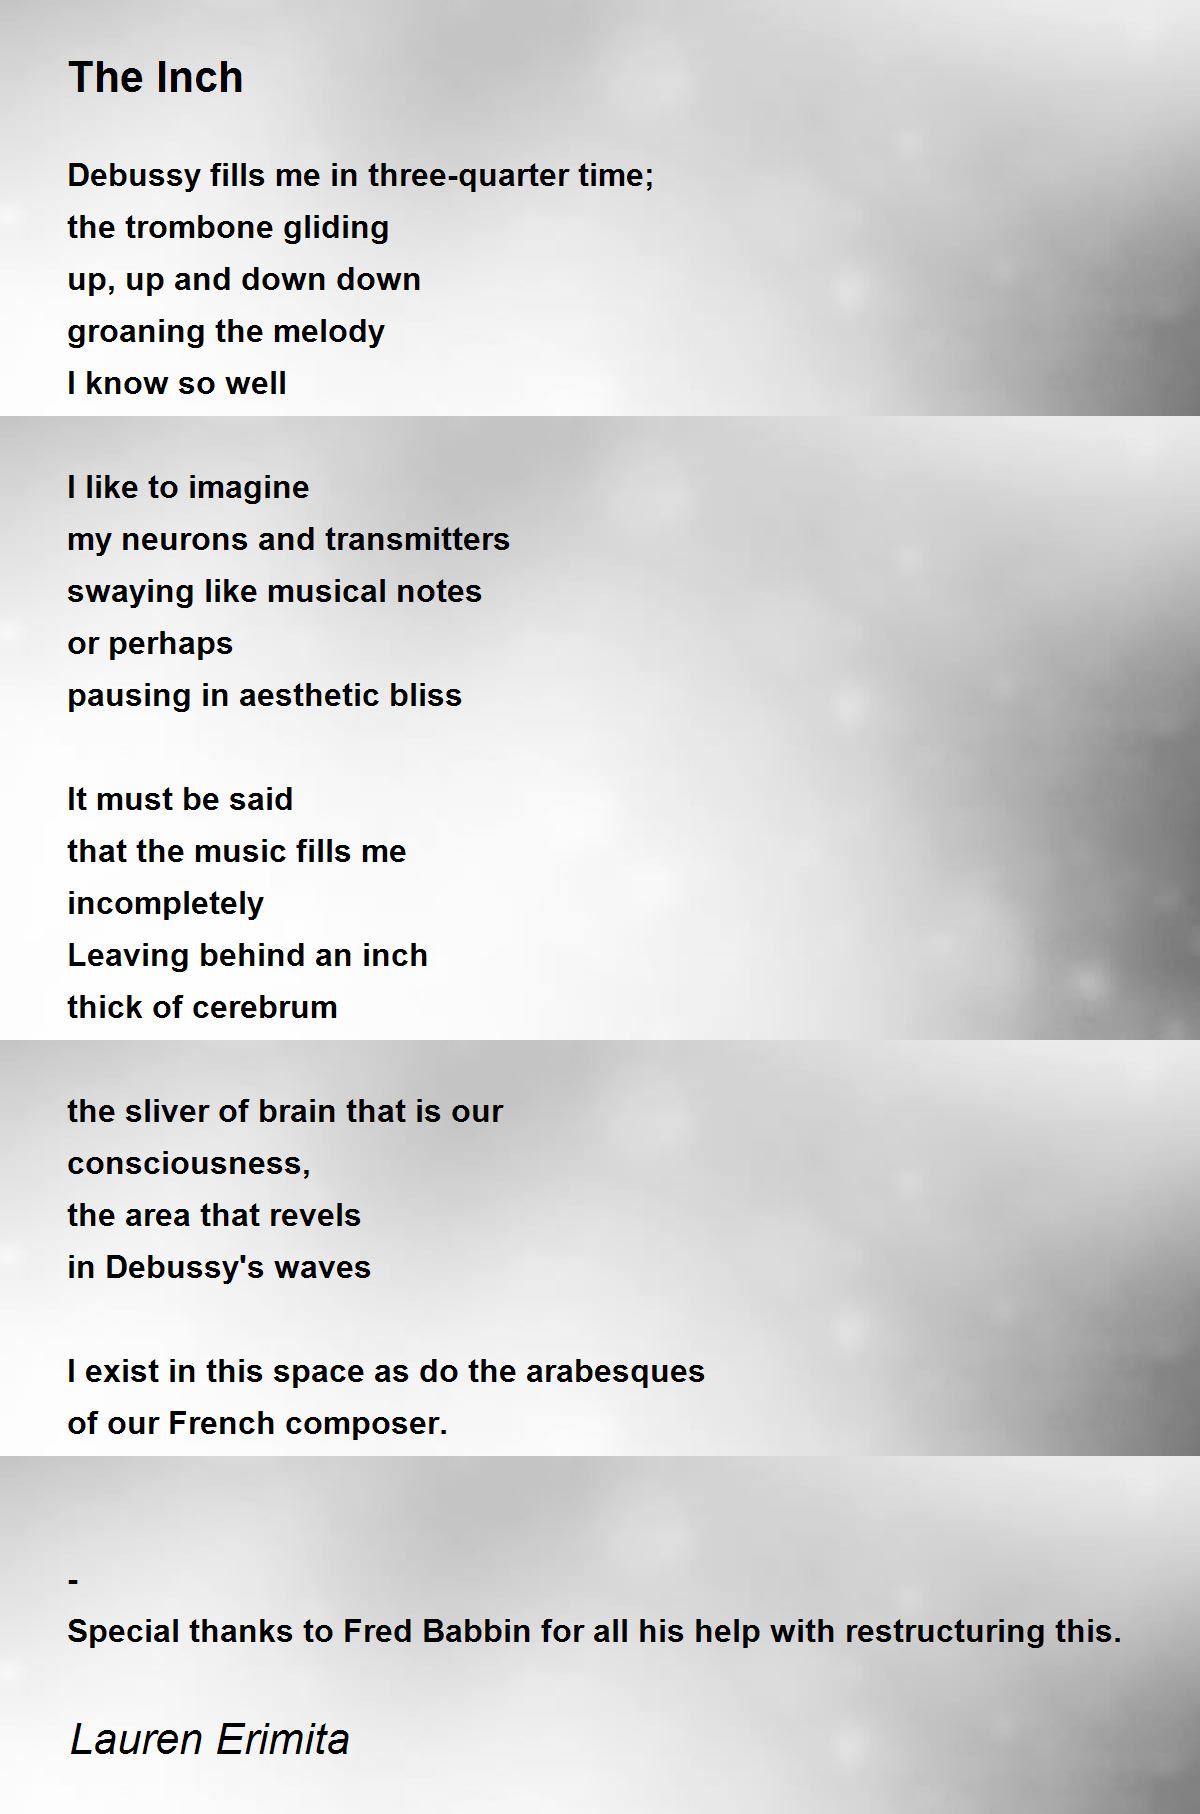 What If I Am Merely Puns And Quips? - What If I Am Merely Puns And Quips?  Poem by Lauren Erimita